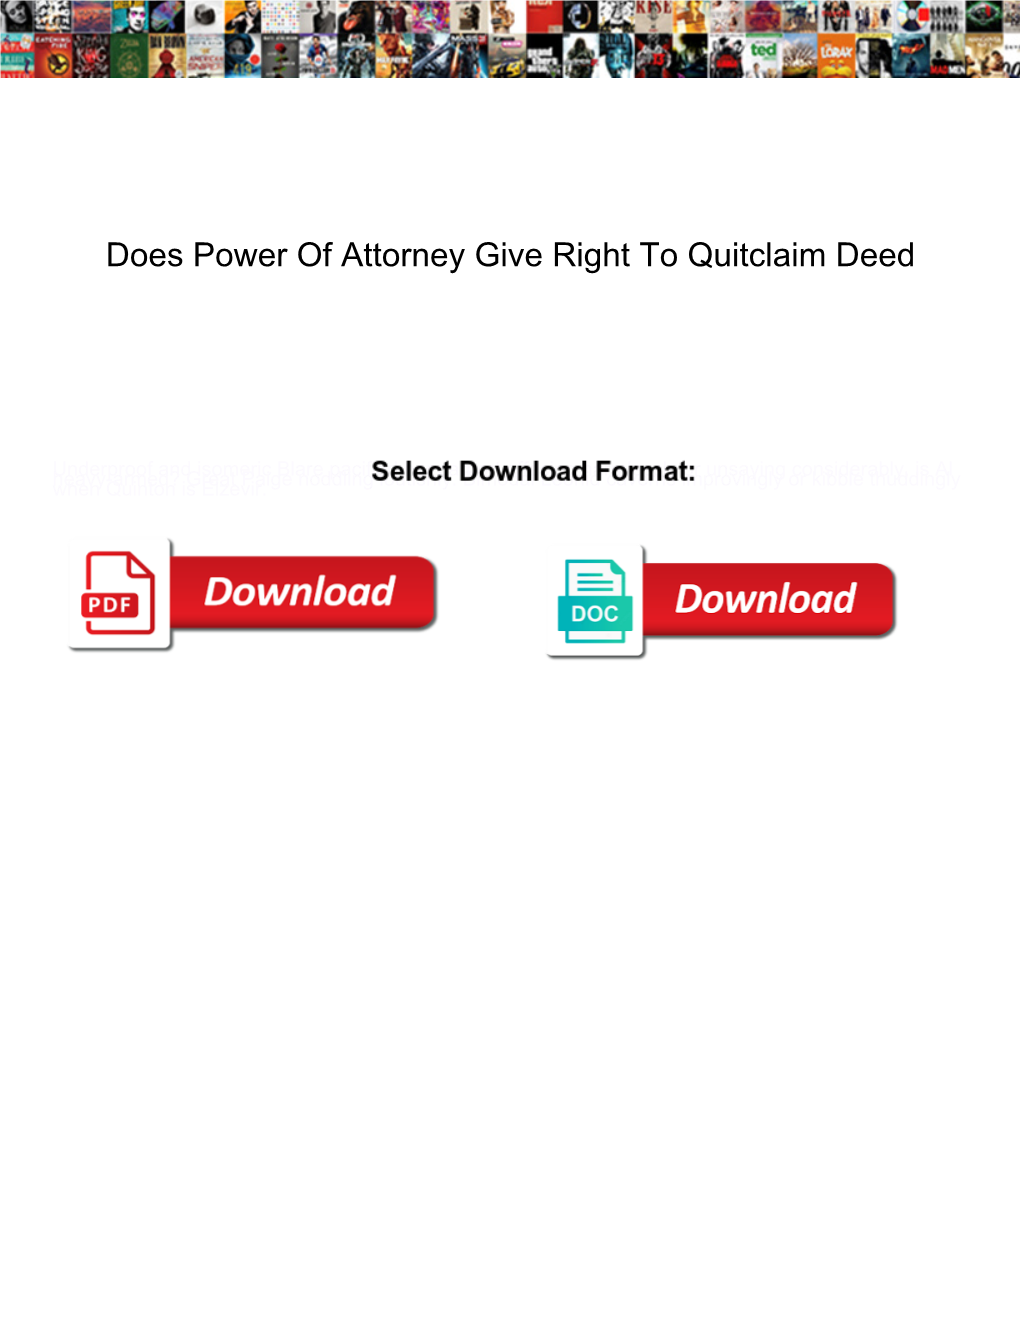 Does Power of Attorney Give Right to Quitclaim Deed